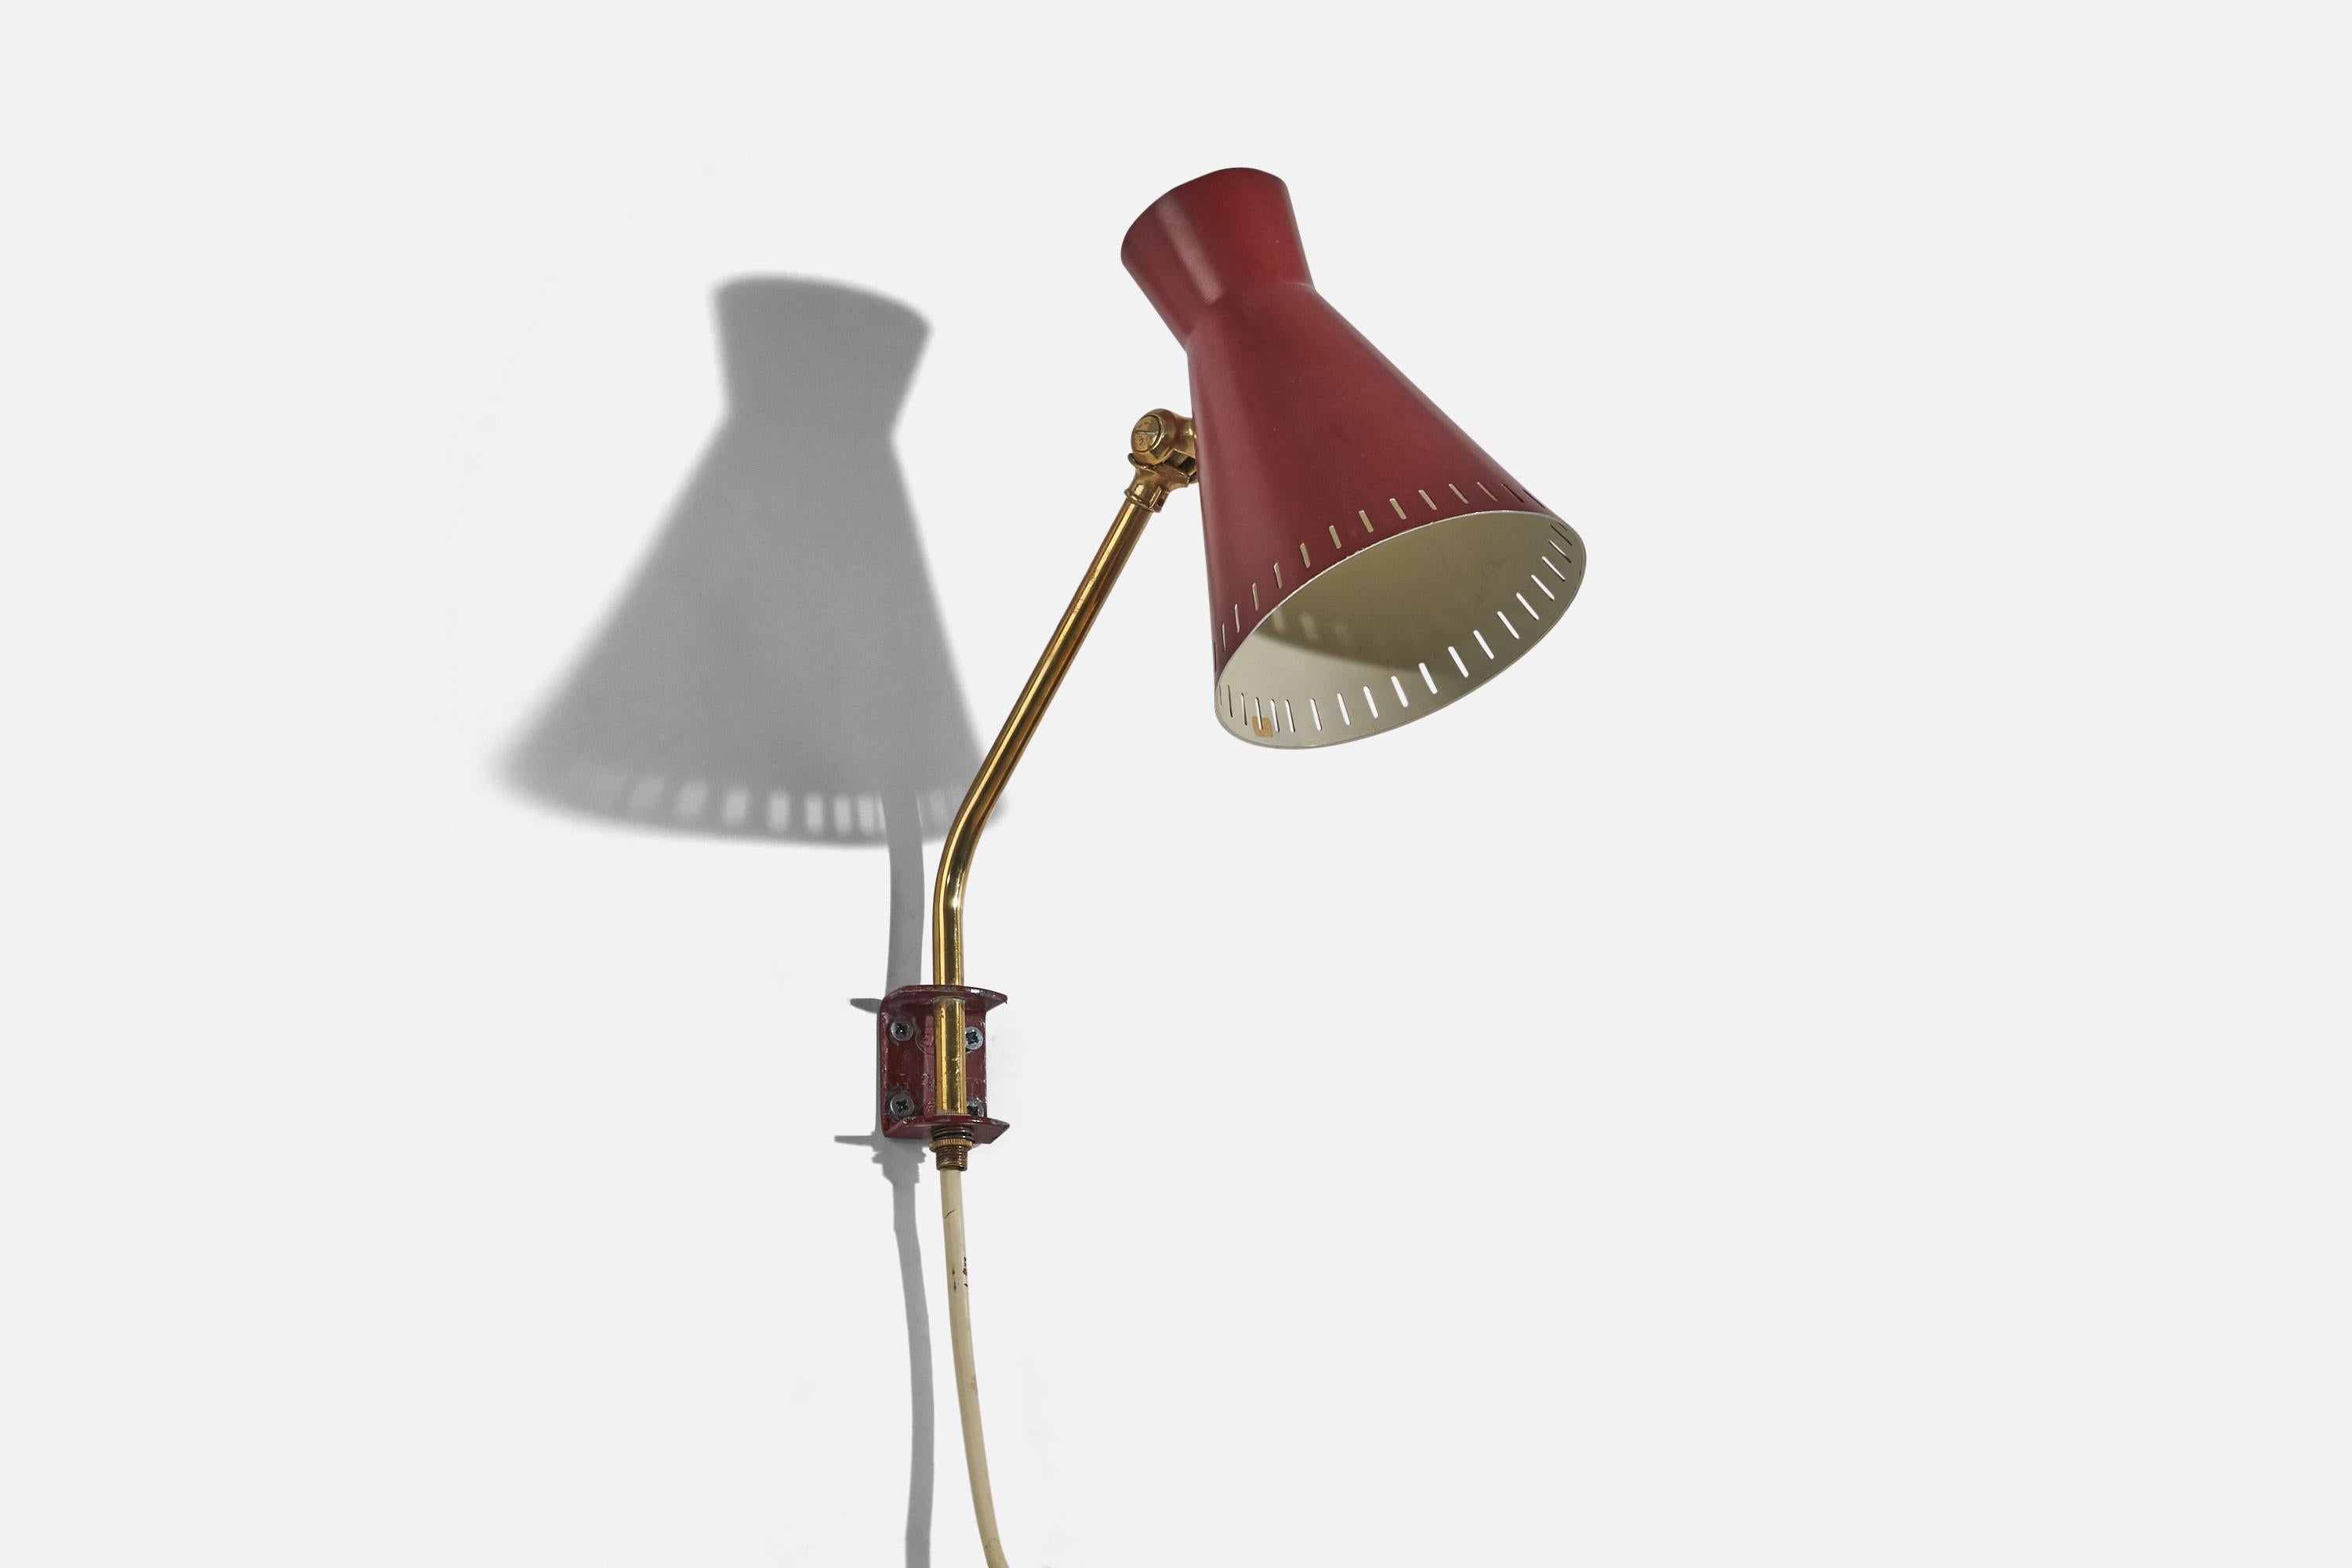 A brass and red lacquered metal wall light designed and produced in Sweden, c. 1940s.

Dimensions of back plate (inches) : 1.75 x 1.3125 x .9375 (H x W x D).